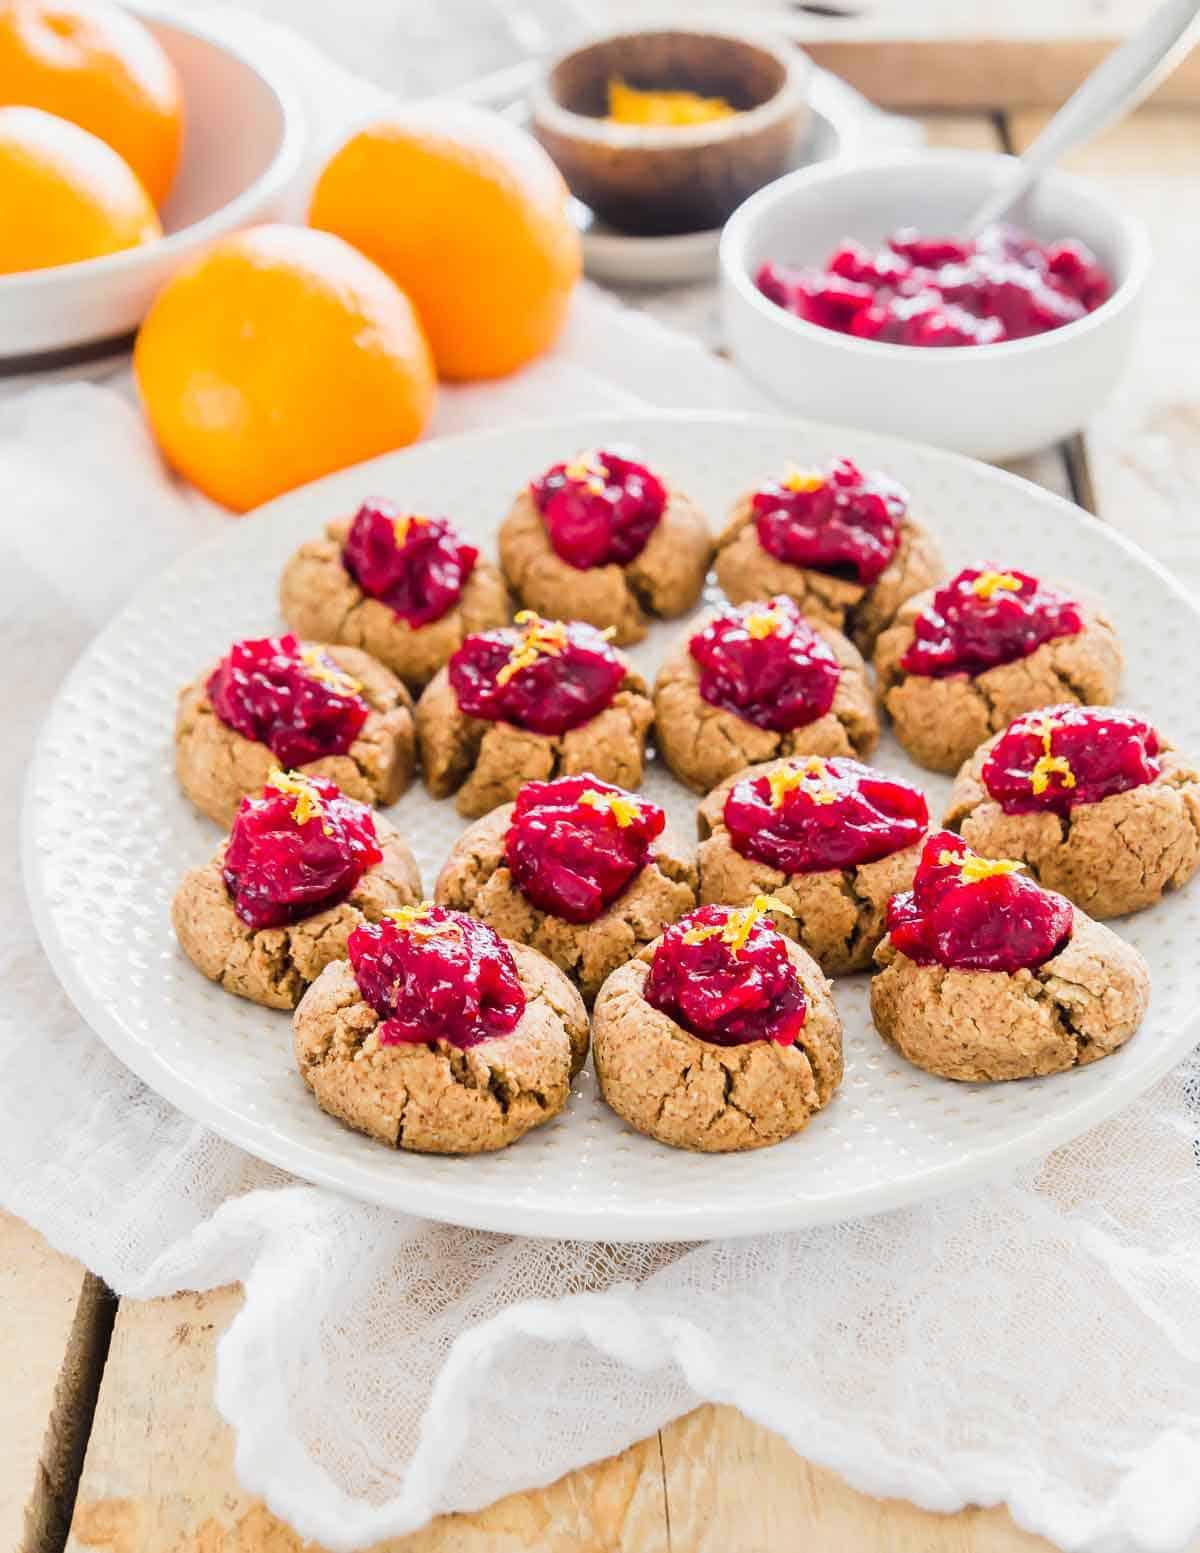 Thumbprint almond pulp cookies are the easiest and tastiest way to use leftover almond pulp from homemade almond milk - a gluten-free & vegan recipe using almond pulp and oat flour. 